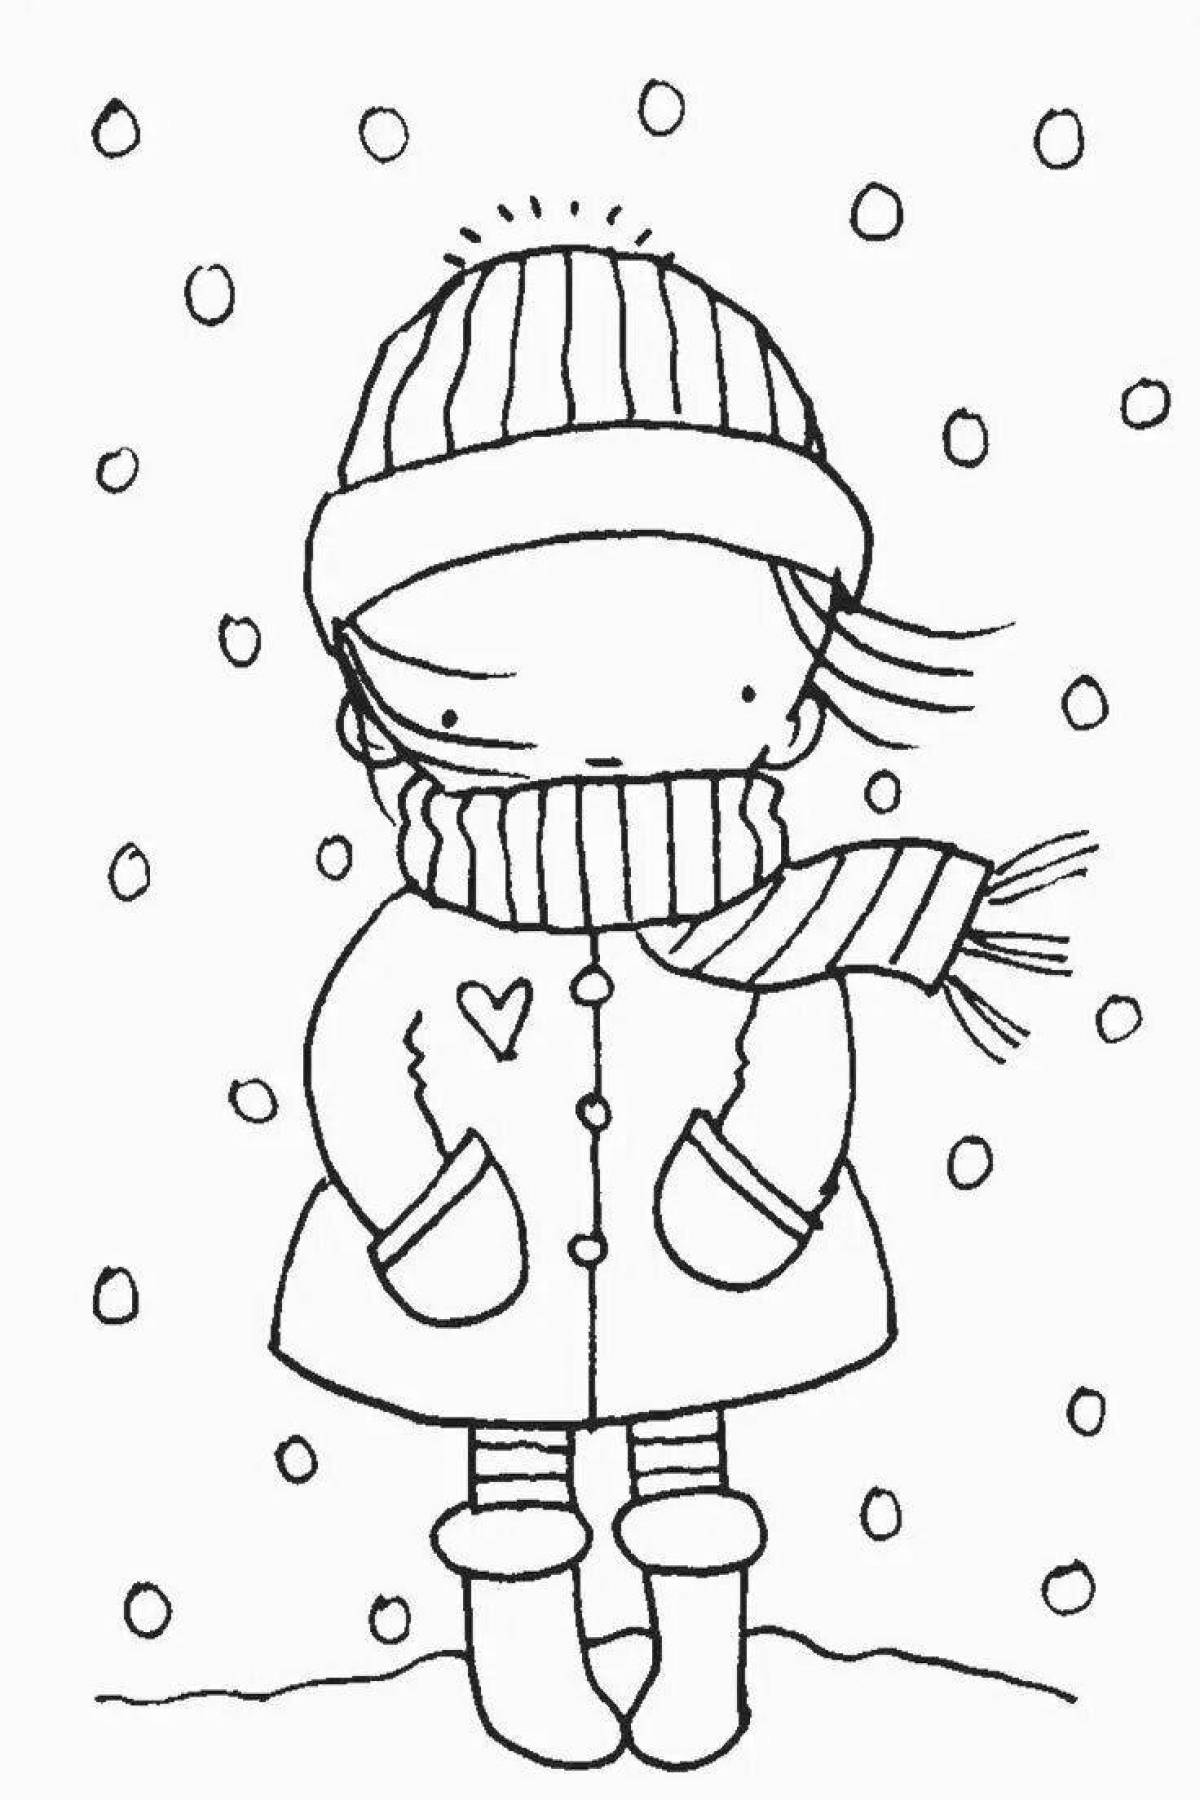 Coloring pages with beautiful winter clothes for children 5-6 years old